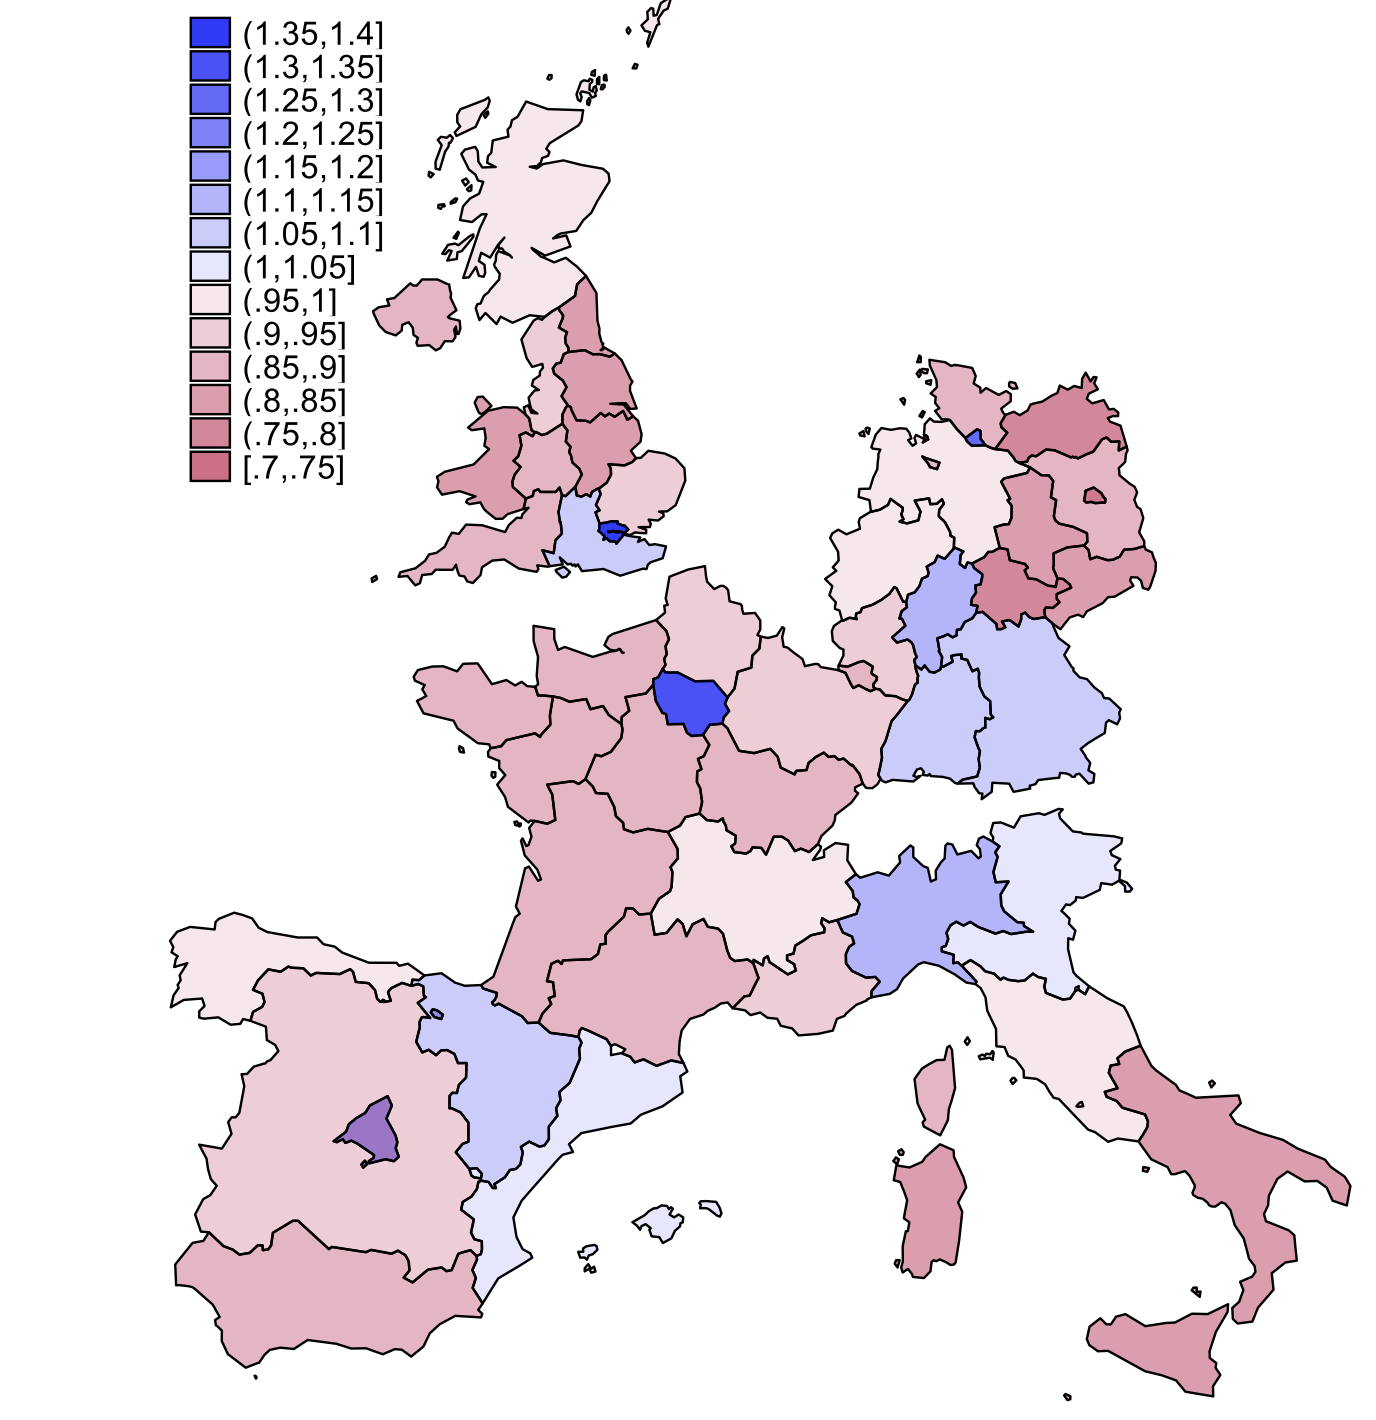 Figure 3 The productivity gap between London and the South East versus the rest is comparable to the gap between East and West Germany, or North and South Italy